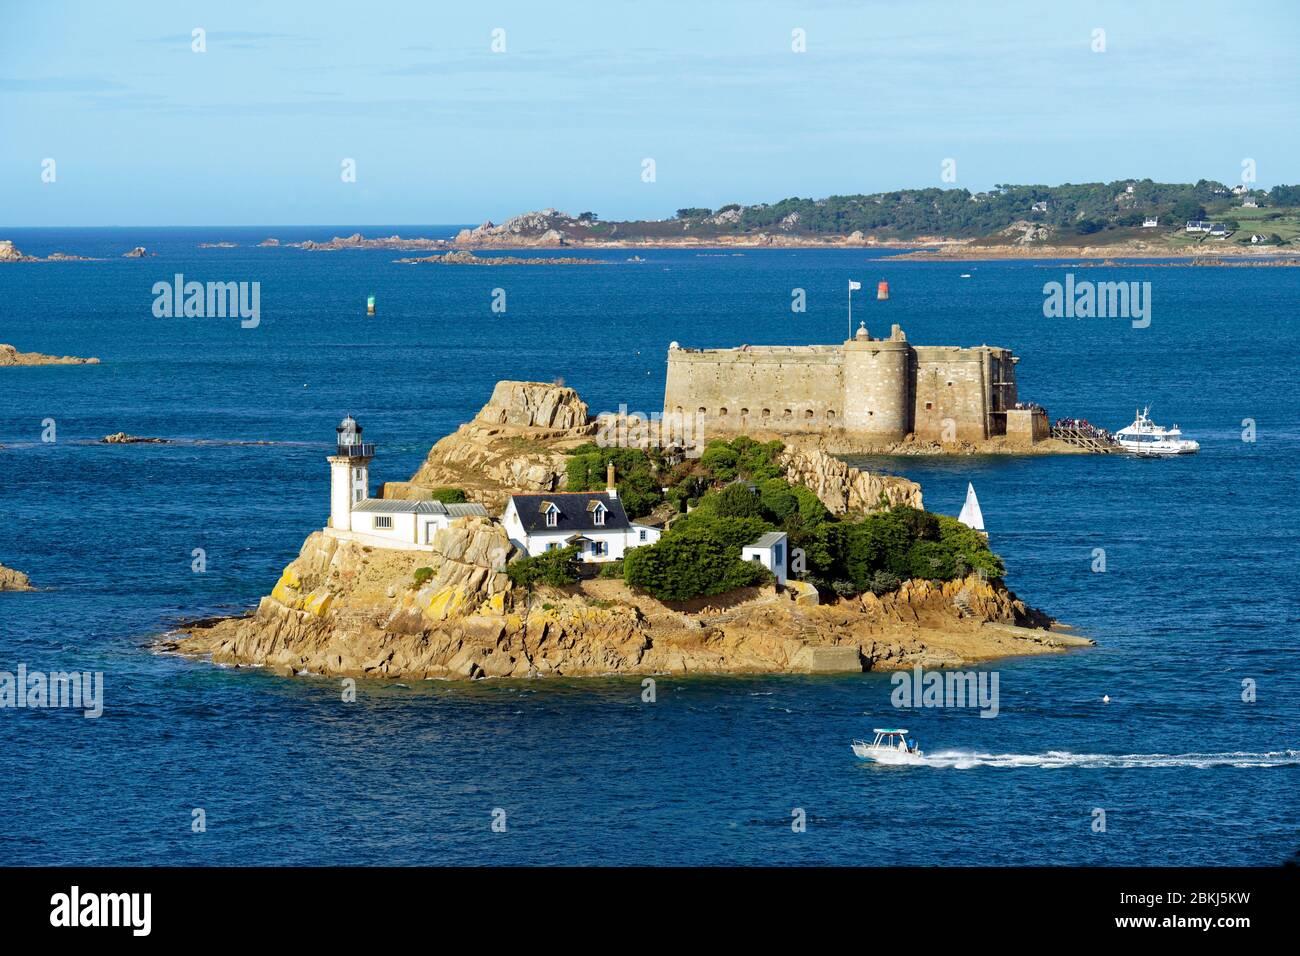 France, Finistere, Morlaix bay, Carantec, Louet island with its ...